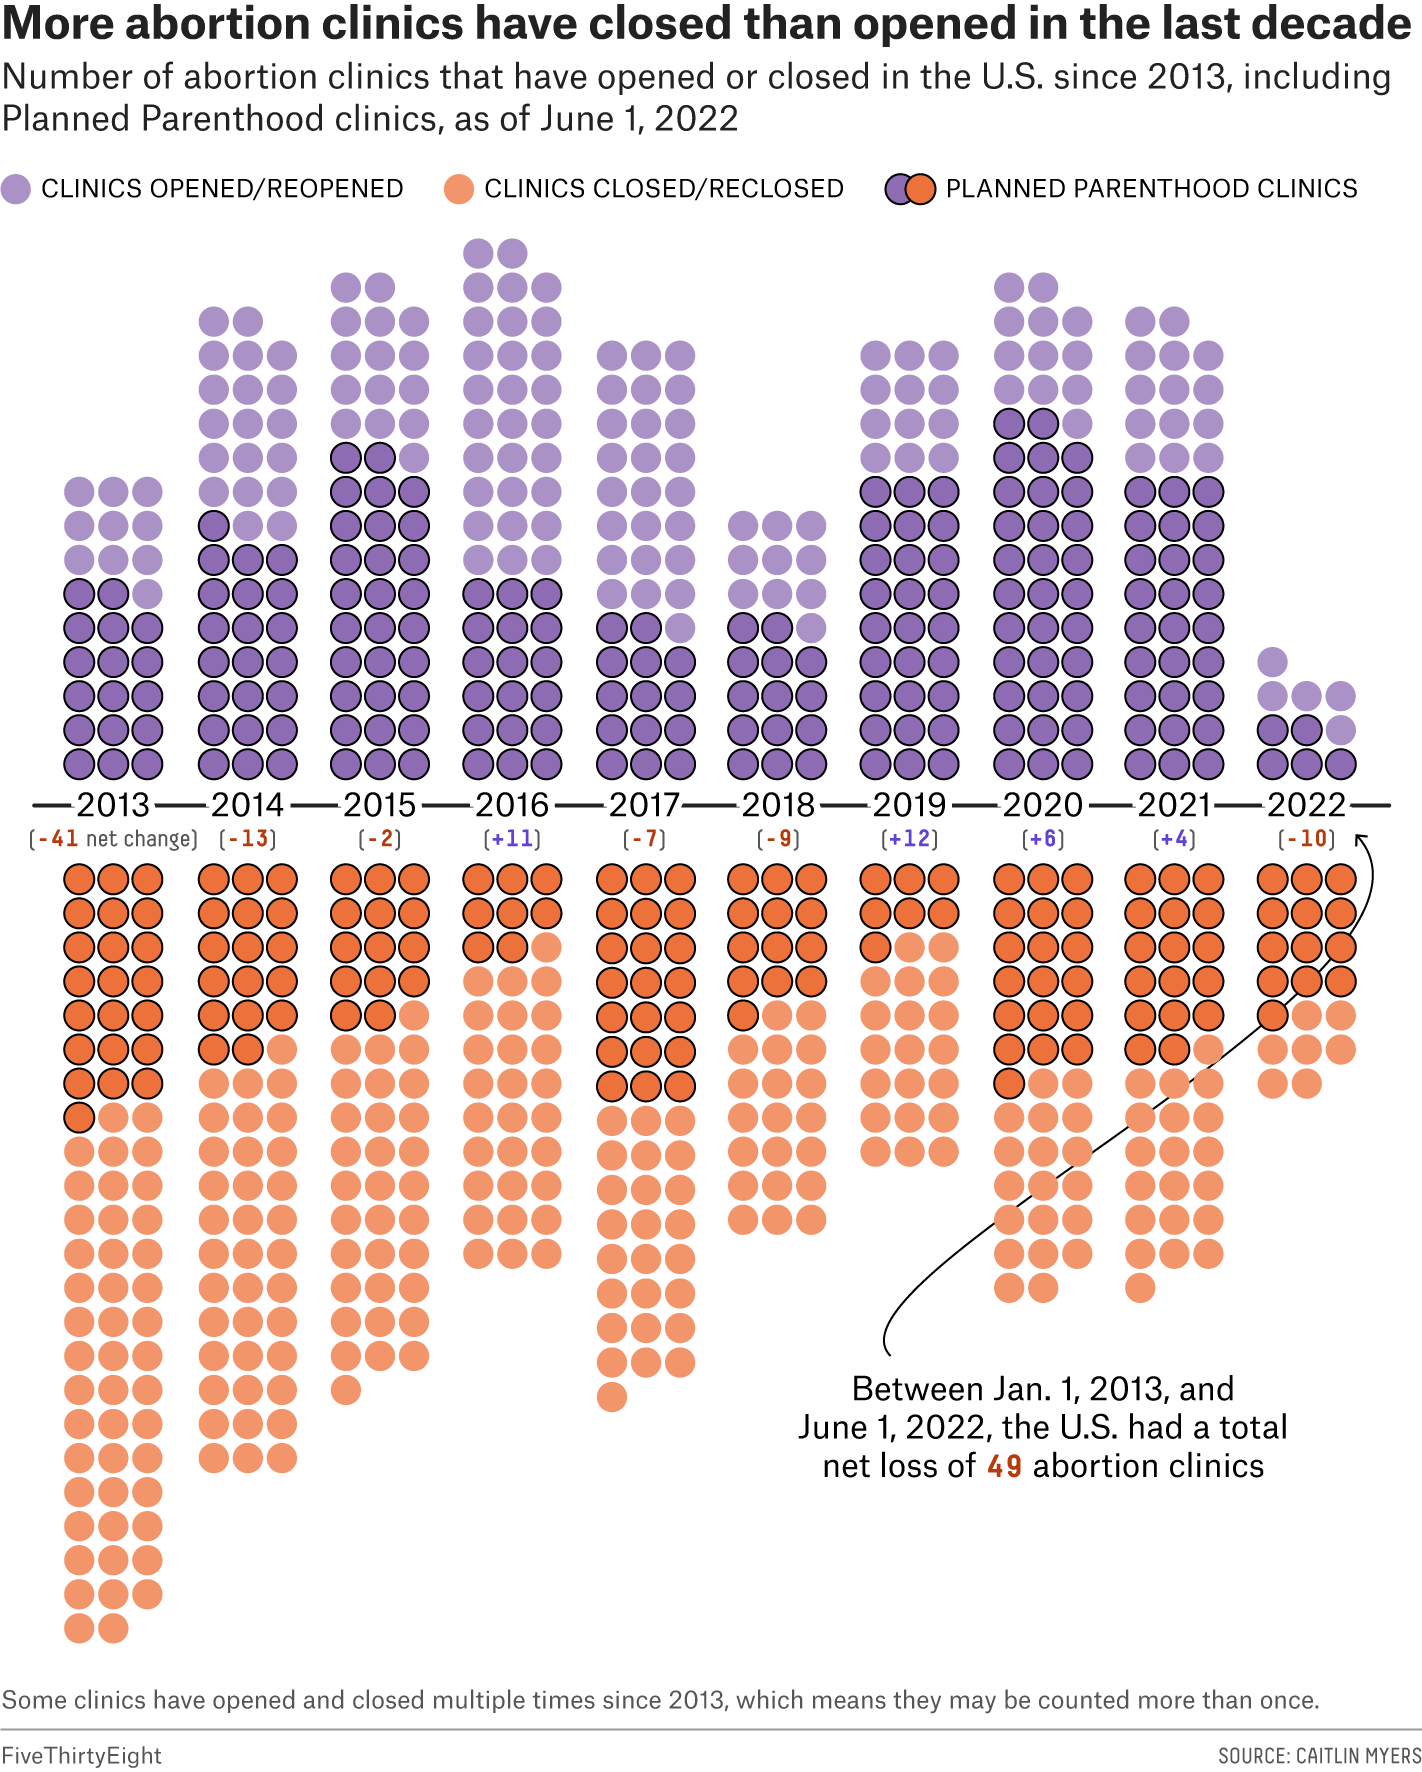 Bar chart of dots representing the number of abortion clinics, including Planned Parenthood clinics, that have opened or closed in the U.S. each year from January 1, 2013, to June 1, 2022, showing that more abortion clinics are closing than opening. During this time the U.S. has a net loss of 49 clinics.